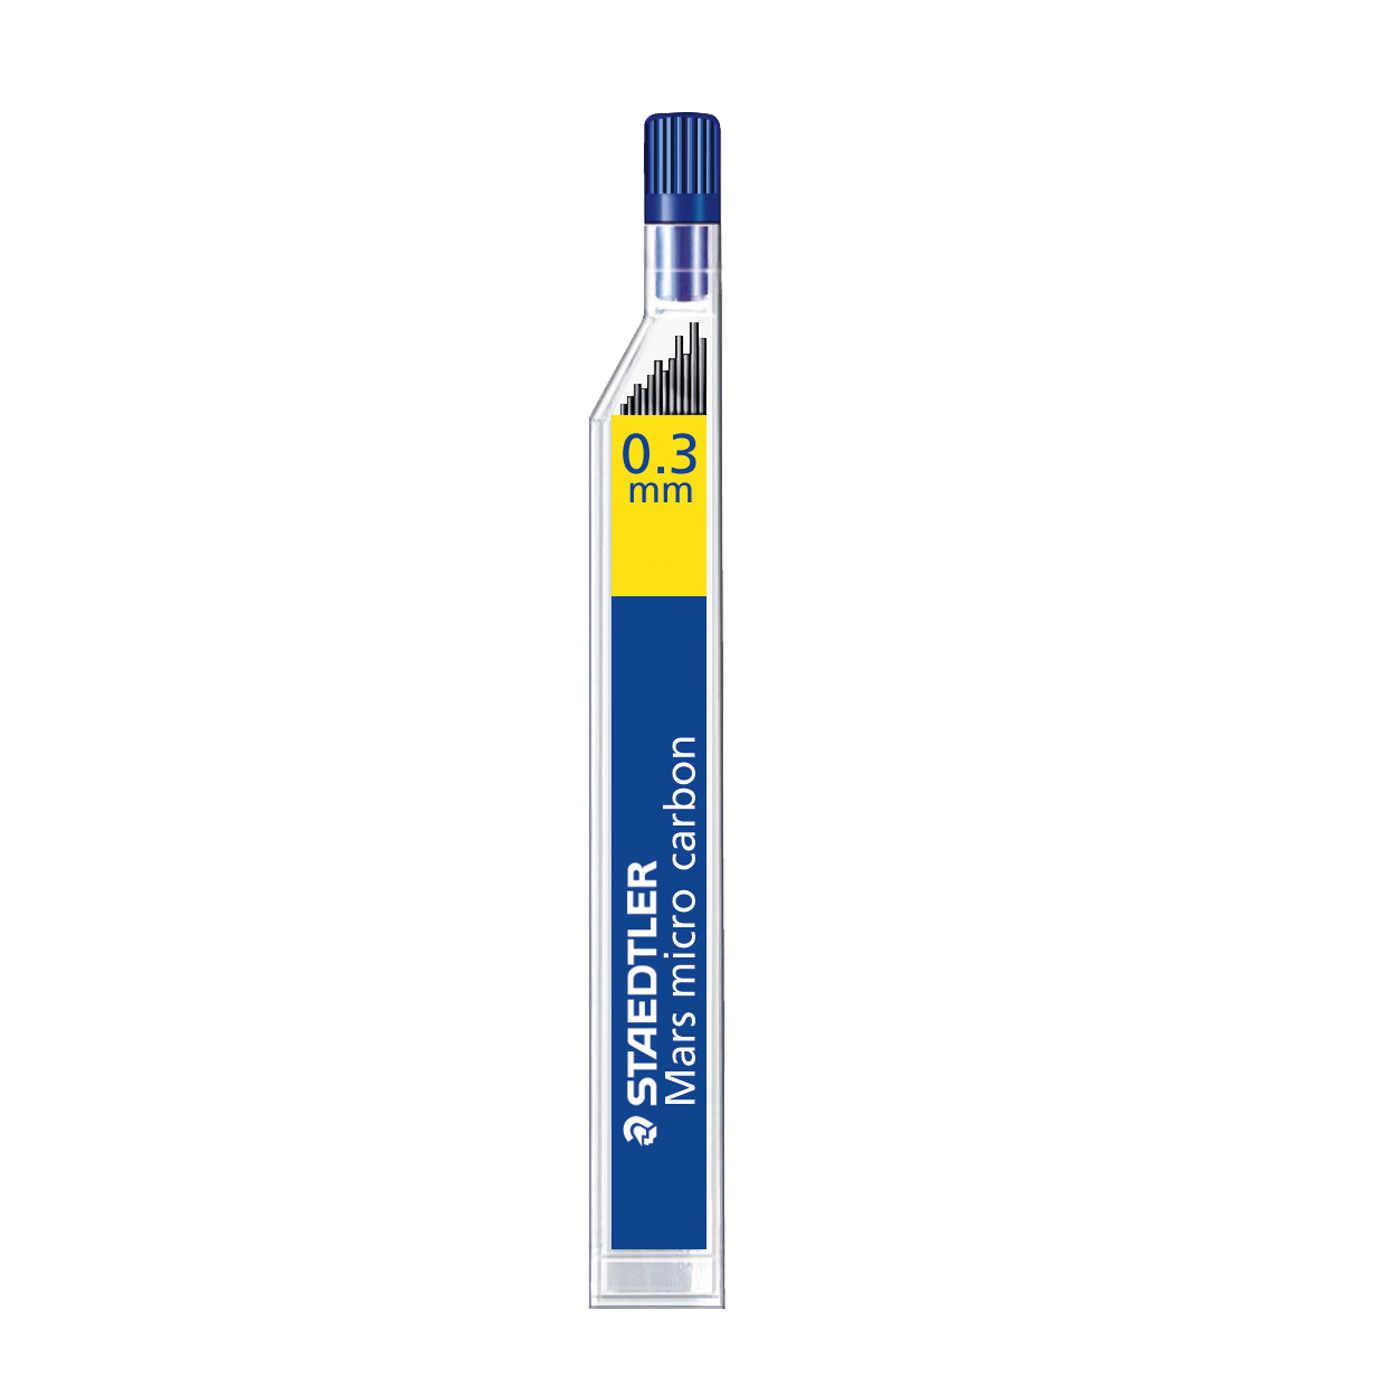 Staedtler Mechanical Pencil Leads Refill 0.3mm Mars Micro Tube of 12 [2H, B, H, HB]